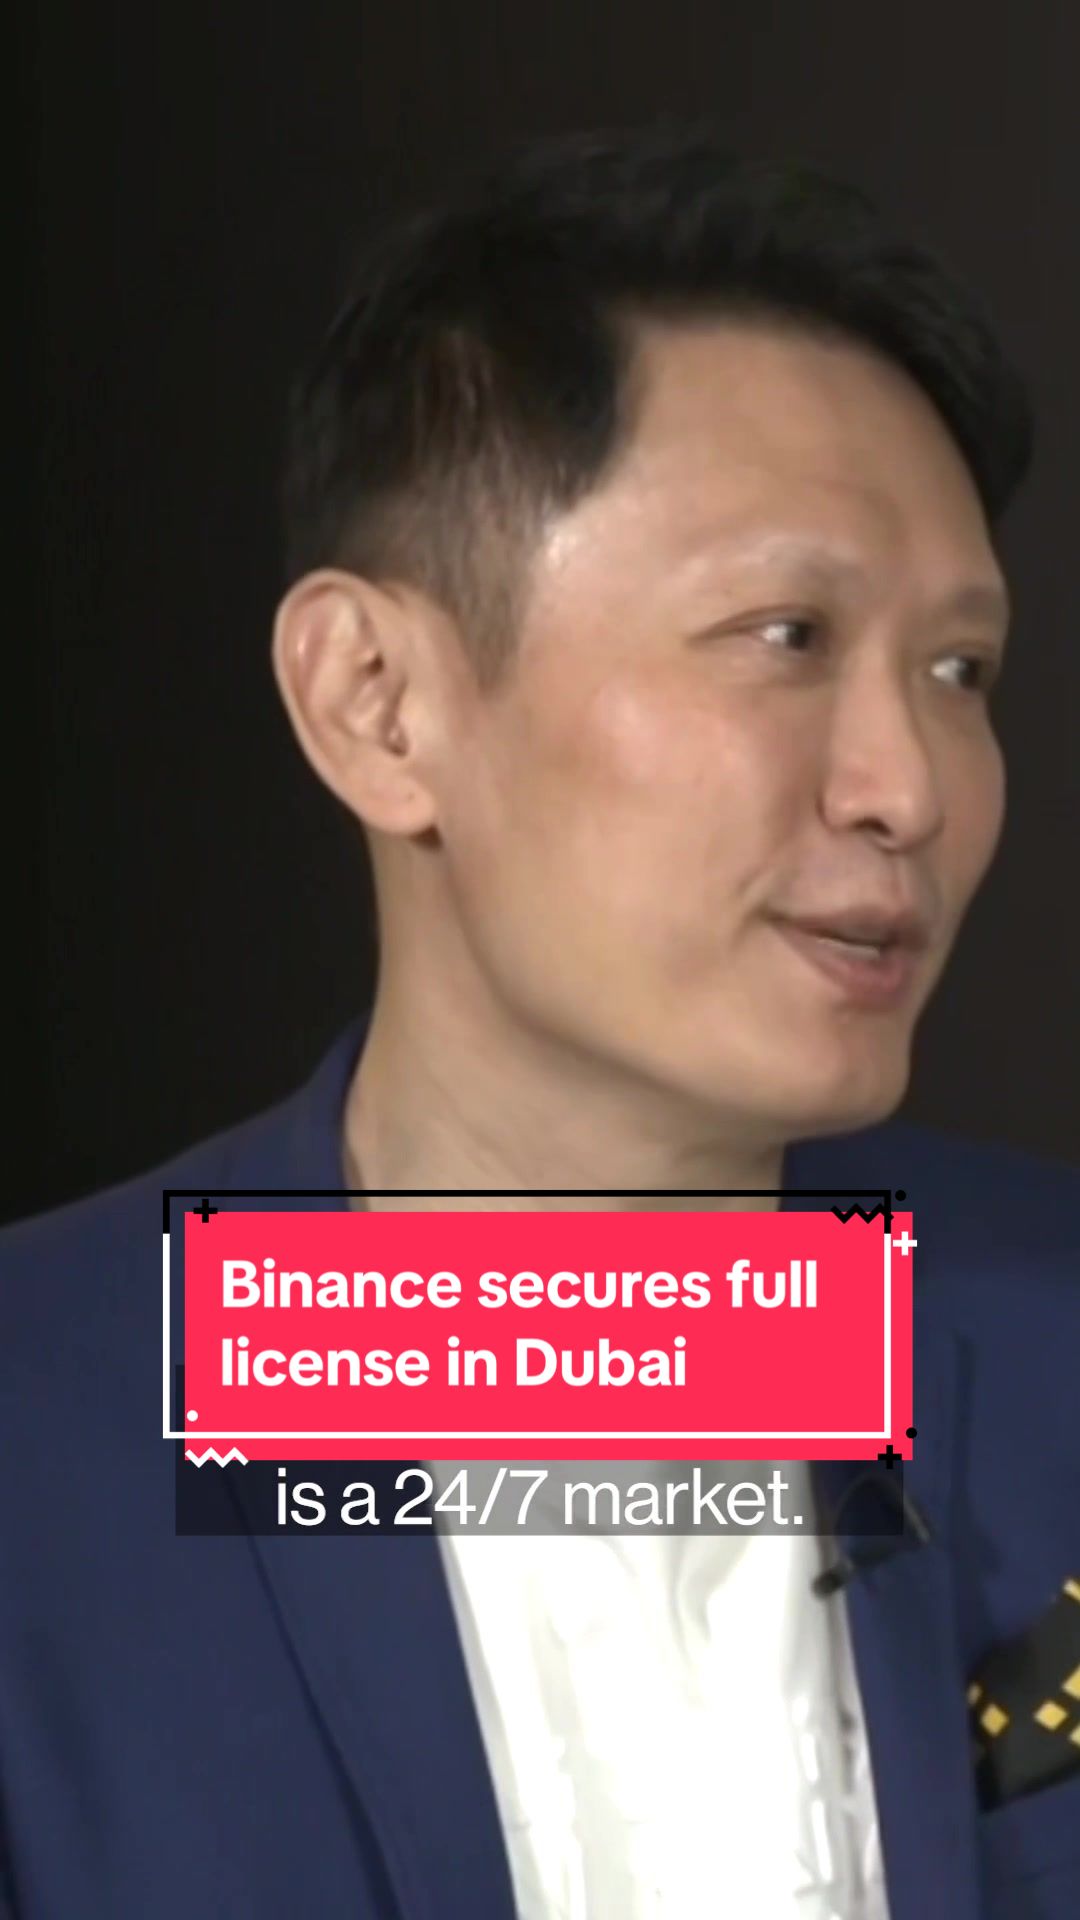 #Binance #CEO Richard Teng says the digital-asset exchange has received its long-sought full #crypto license in #Dubai — The license is a much-needed win for Binance, which suffered a string of regulatory hits over the past two years that culminated in its agreement to pay $4.3 billion in US penalties in November. #investing #tech #cryptocurrency